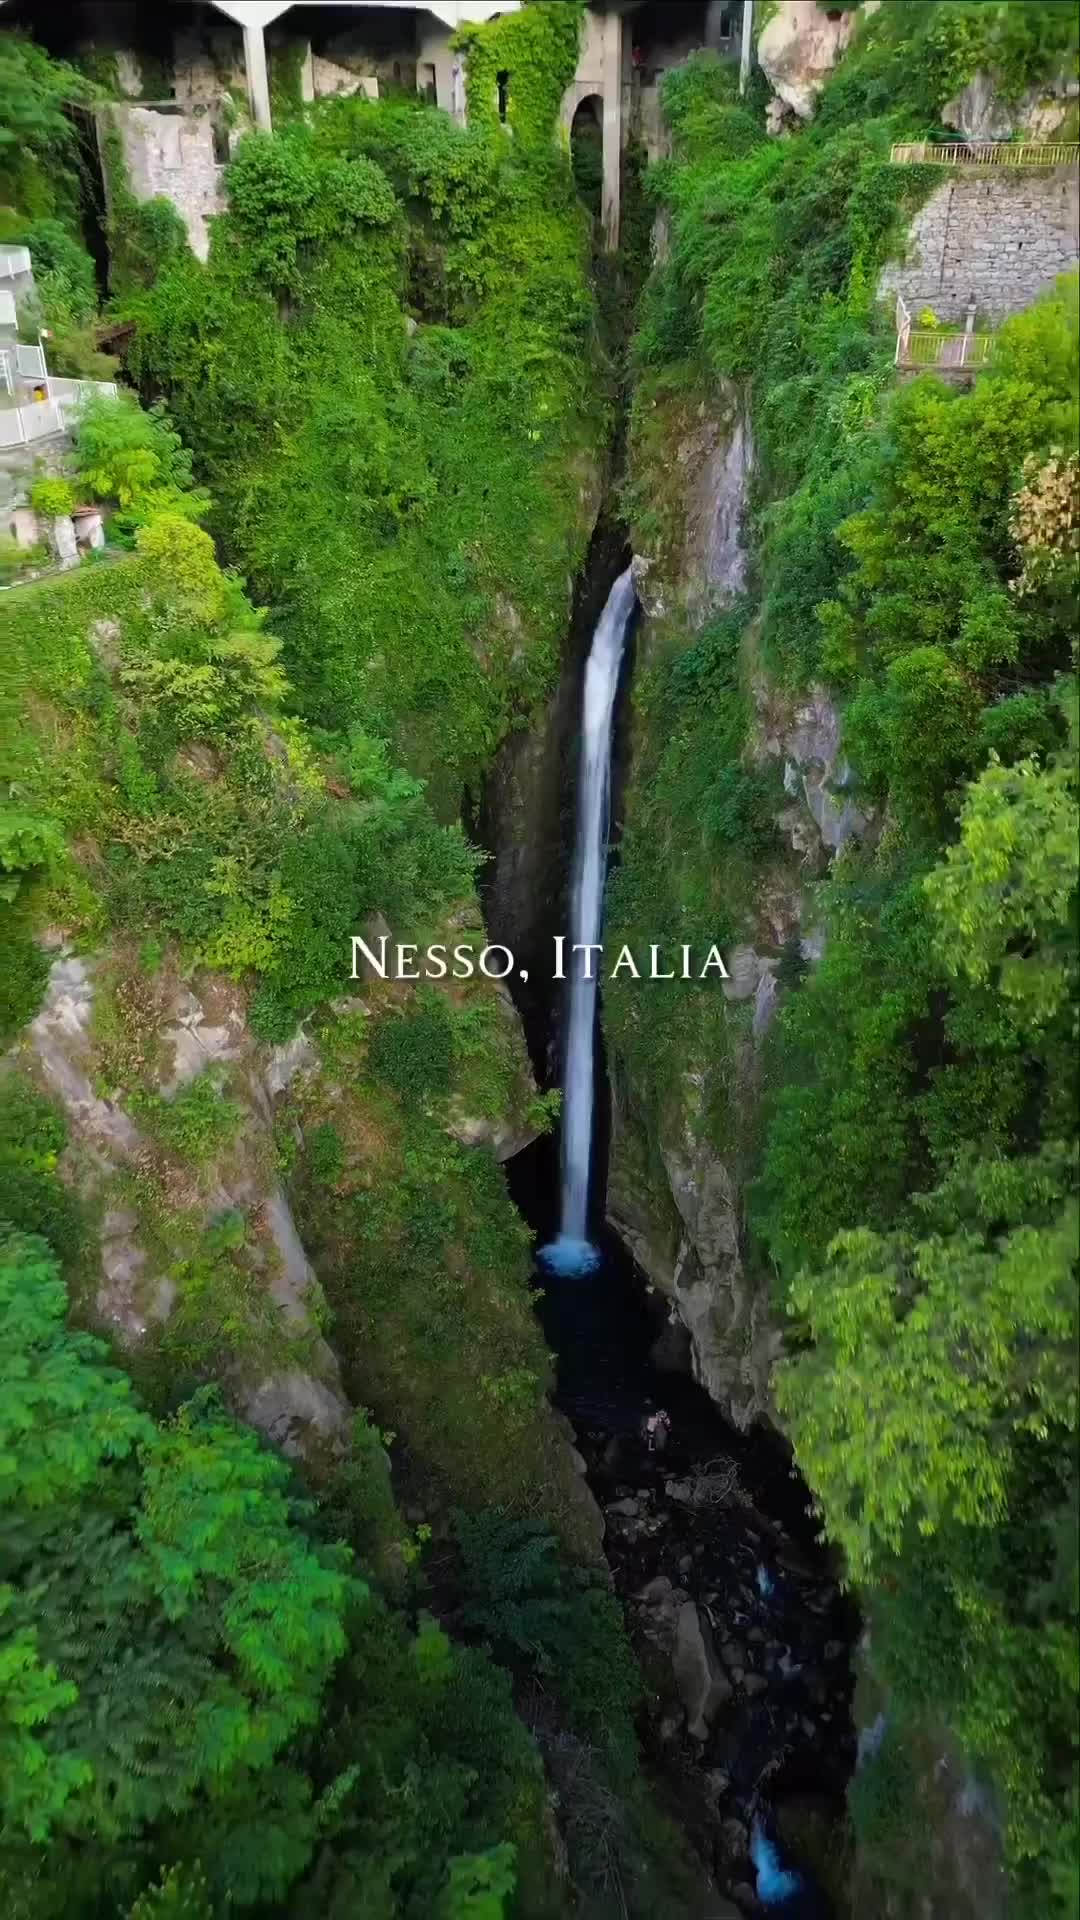 Nesso’s best kept secret! 🇮🇹
Save this reel for when in Lake Como, and enjoy a scenic drive along the lake side to Nesso’s waterfalls.🛵

Tip:

•Park on the highroad and take the steps down to Nesso’s bridge for a dive in Lake Como in the afternoon hours, & enjoy the tranquil time.

•Share and Save for your Lake Como adventure 

#ItalyTravel #italytrip #visititaly #lakecomo #lakecomoexperience